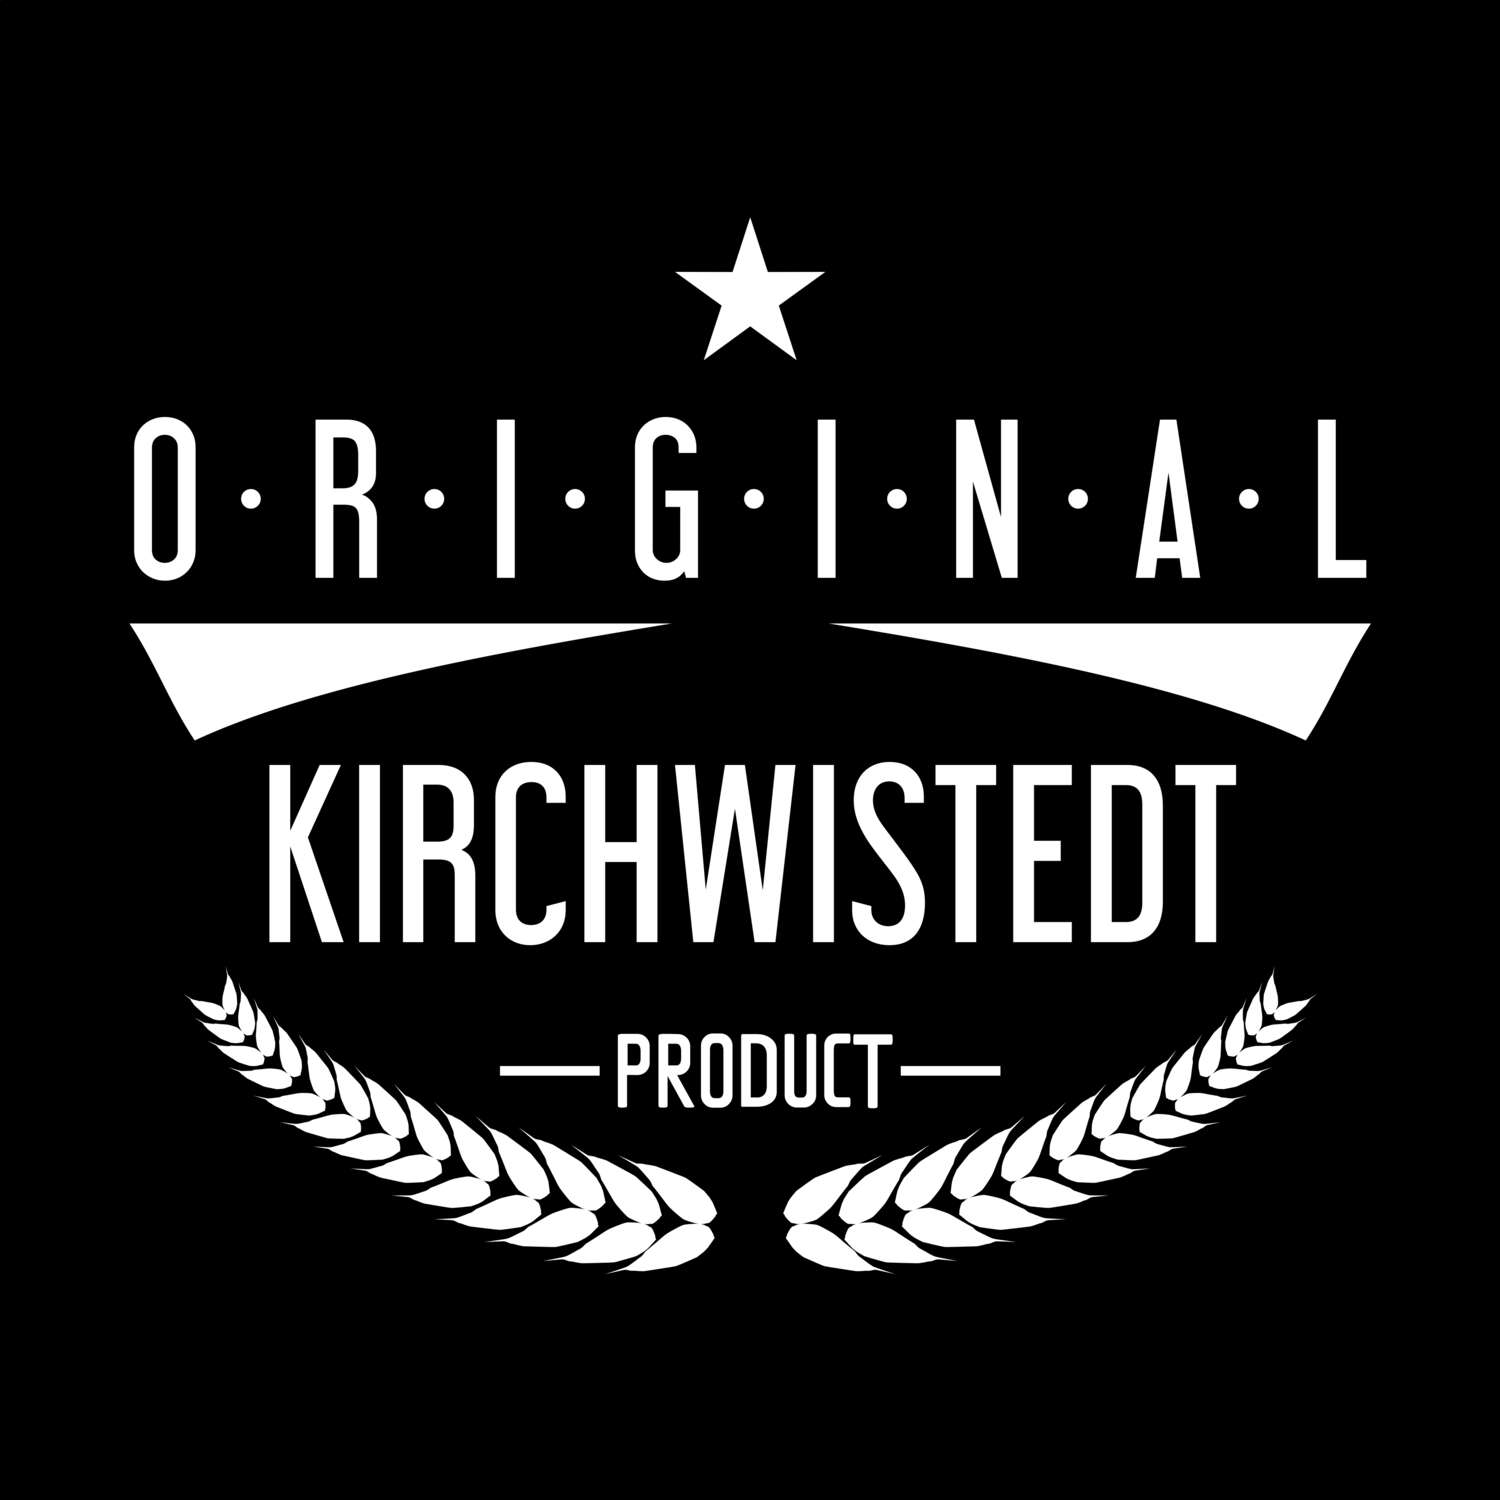 Kirchwistedt T-Shirt »Original Product«